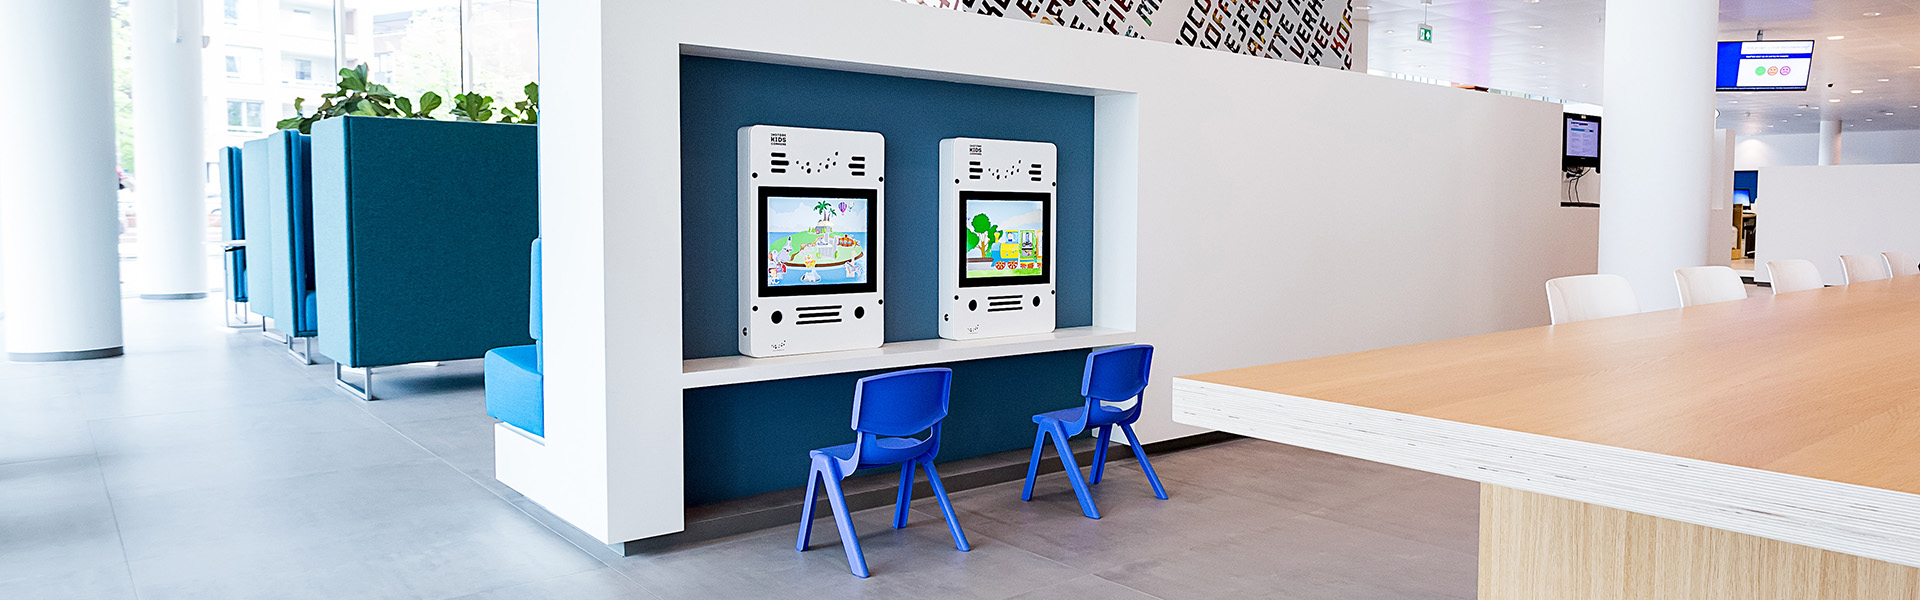 this image shows a kids corner with interactive play system